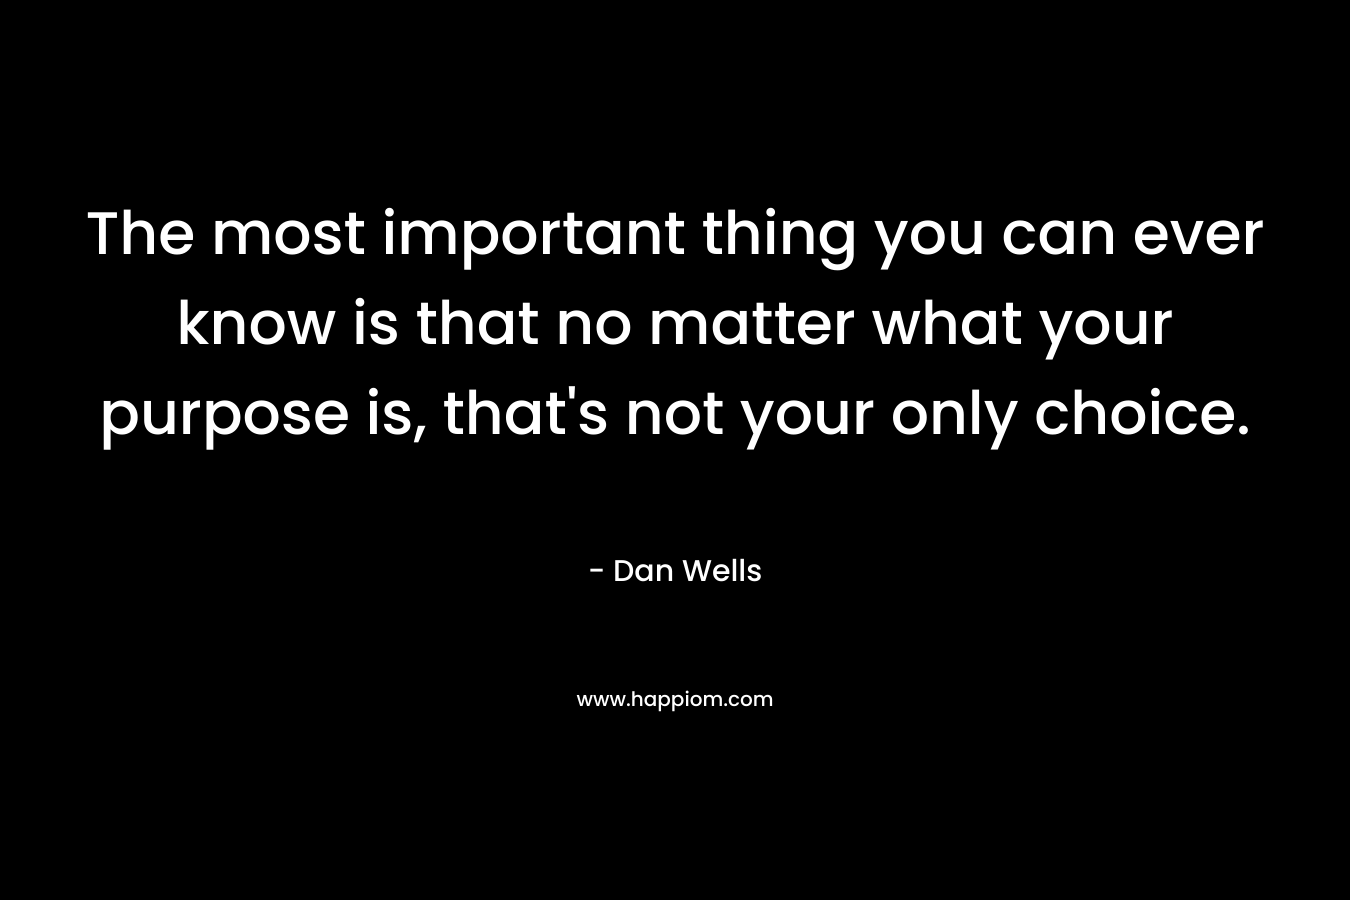 The most important thing you can ever know is that no matter what your purpose is, that's not your only choice.